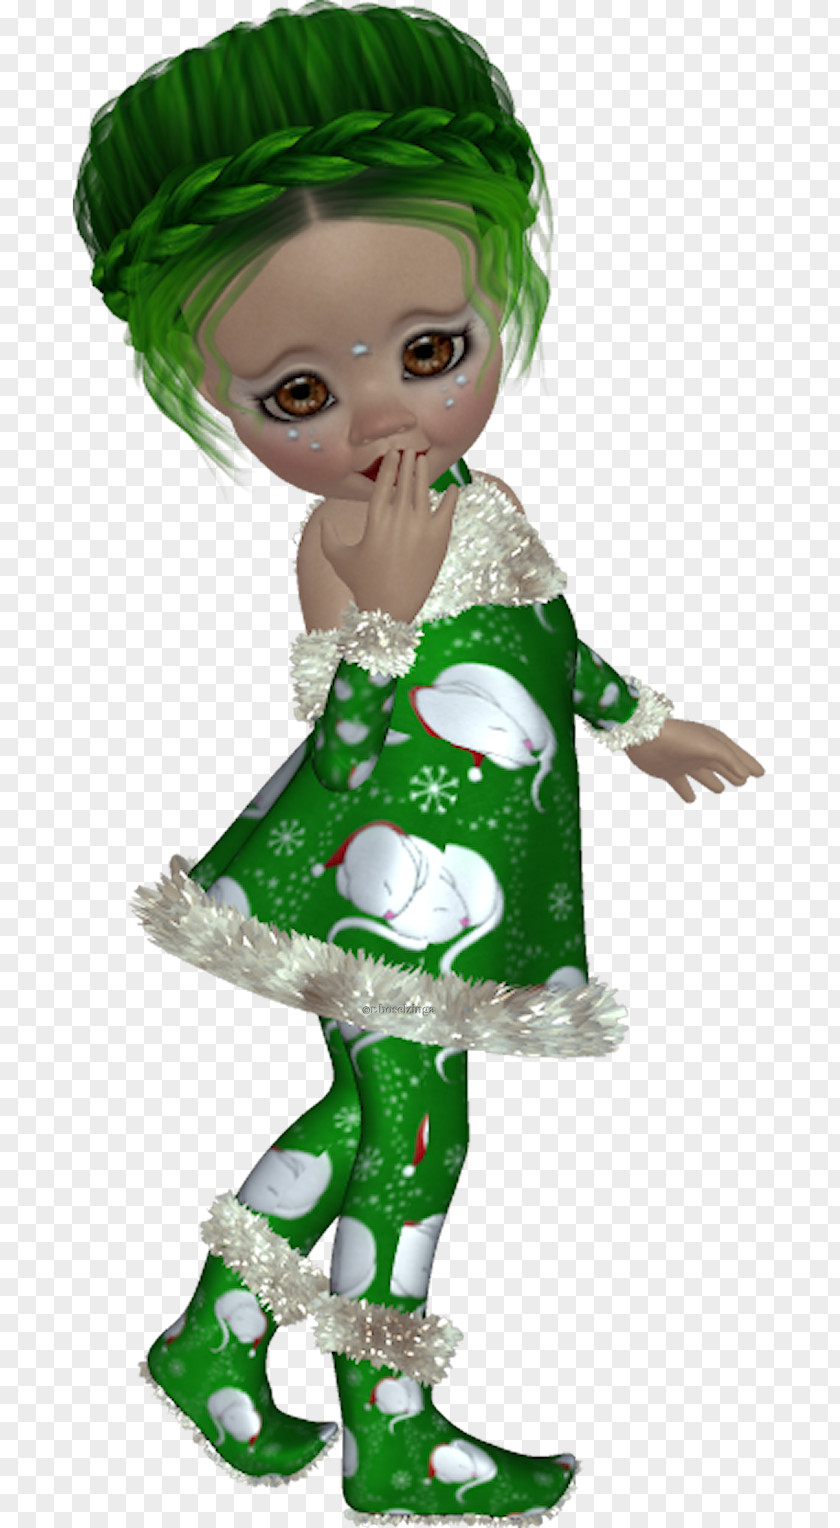 Doll Christmas Ornament Green Toddler PNG